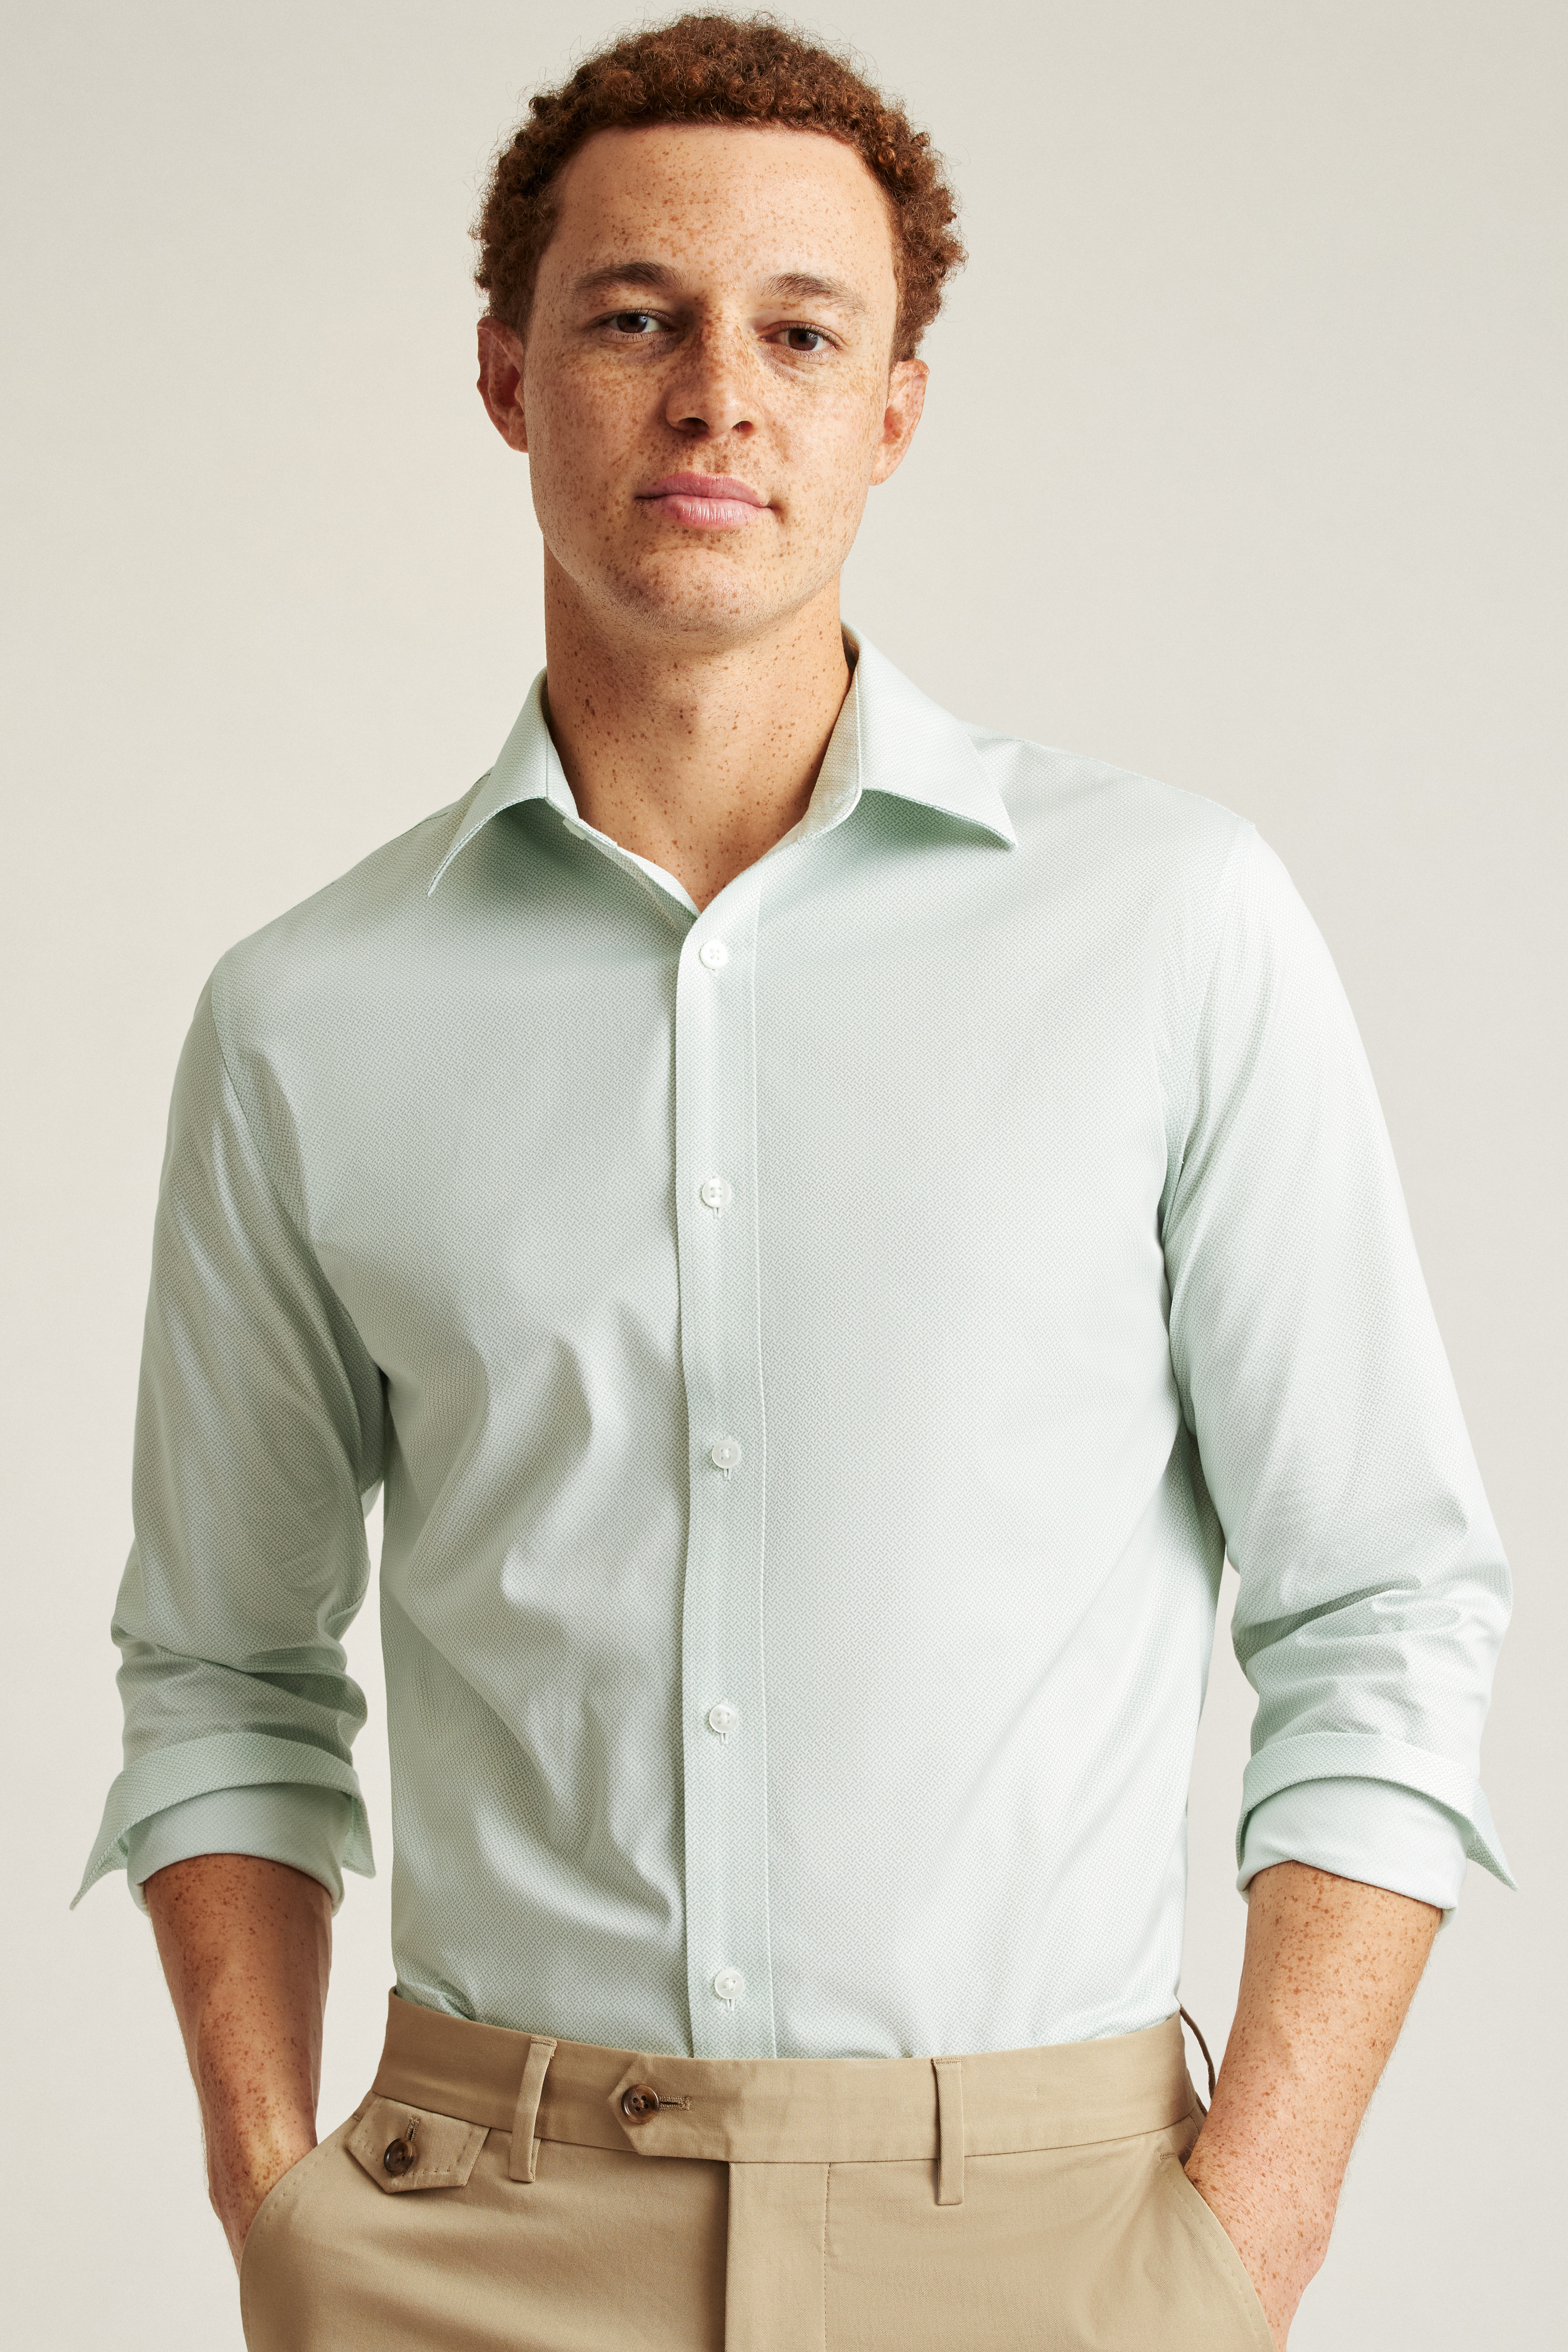 Men's Dress Shirts - Loose & Fitted